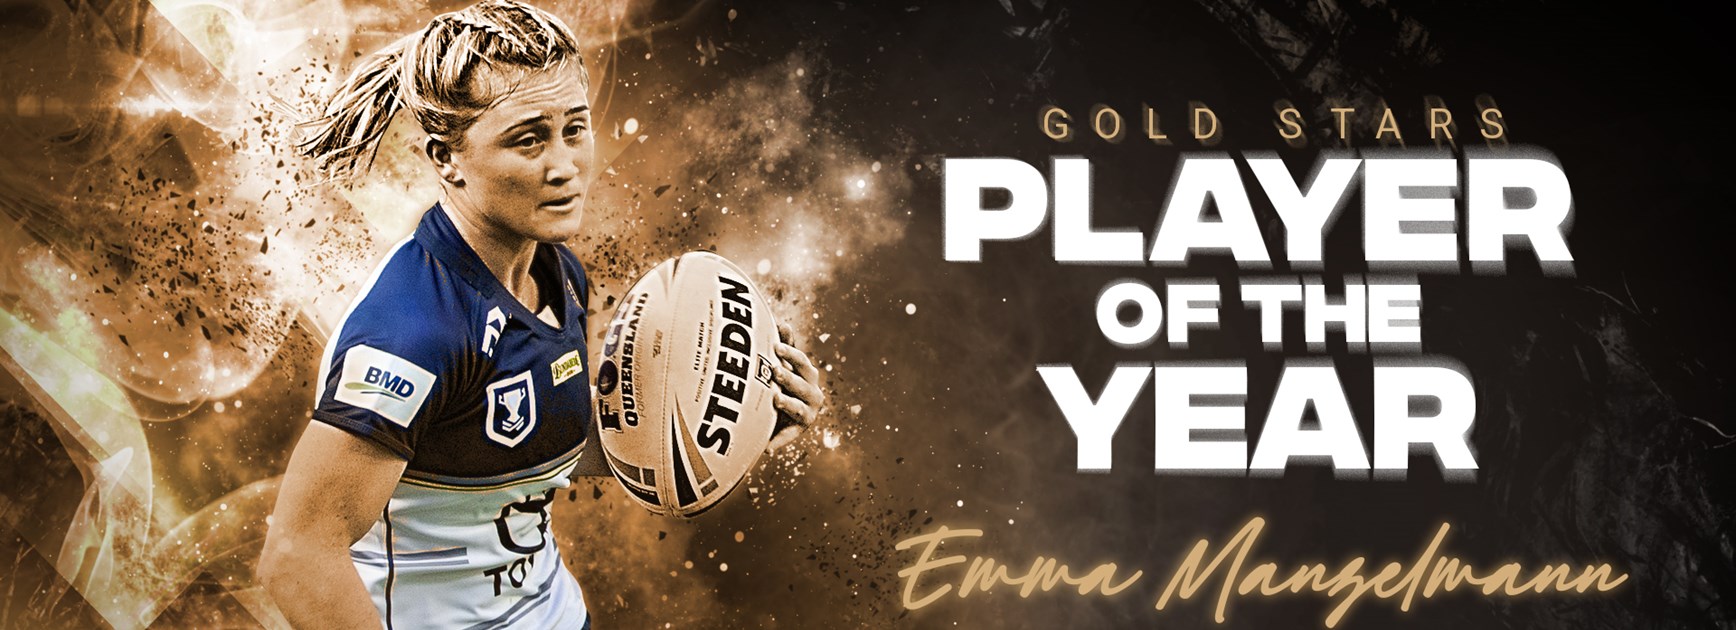 Manzelmann wins back-to-back Player of the Year awards